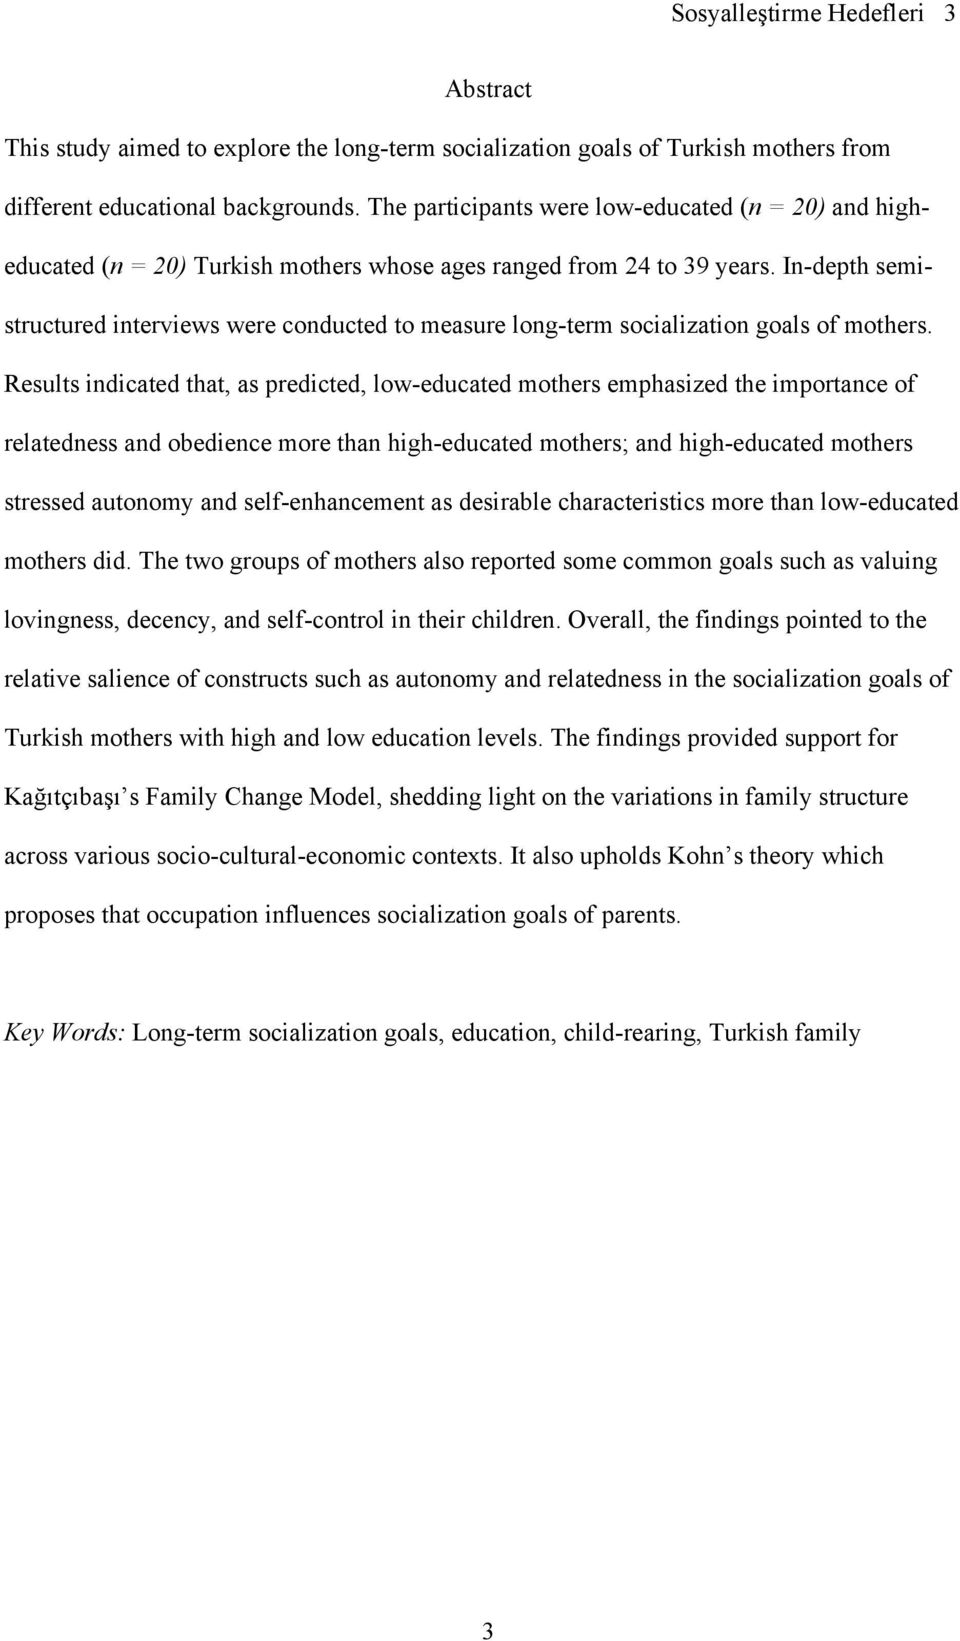 In-depth semistructured interviews were conducted to measure long-term socialization goals of mothers.